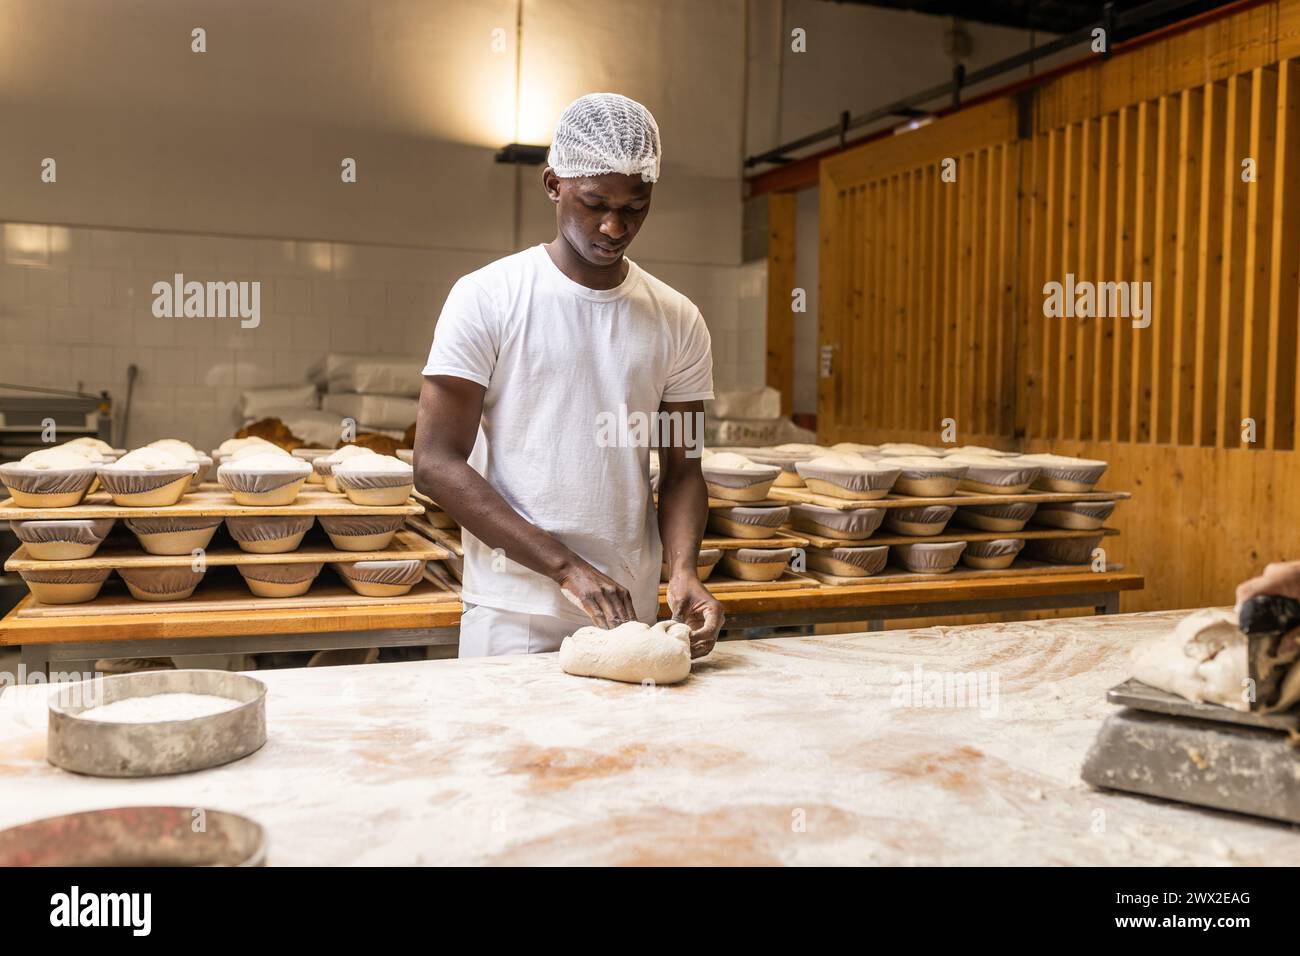 young black male apprentice, kneading bread dough on the bakery school's workbench Stock Photo